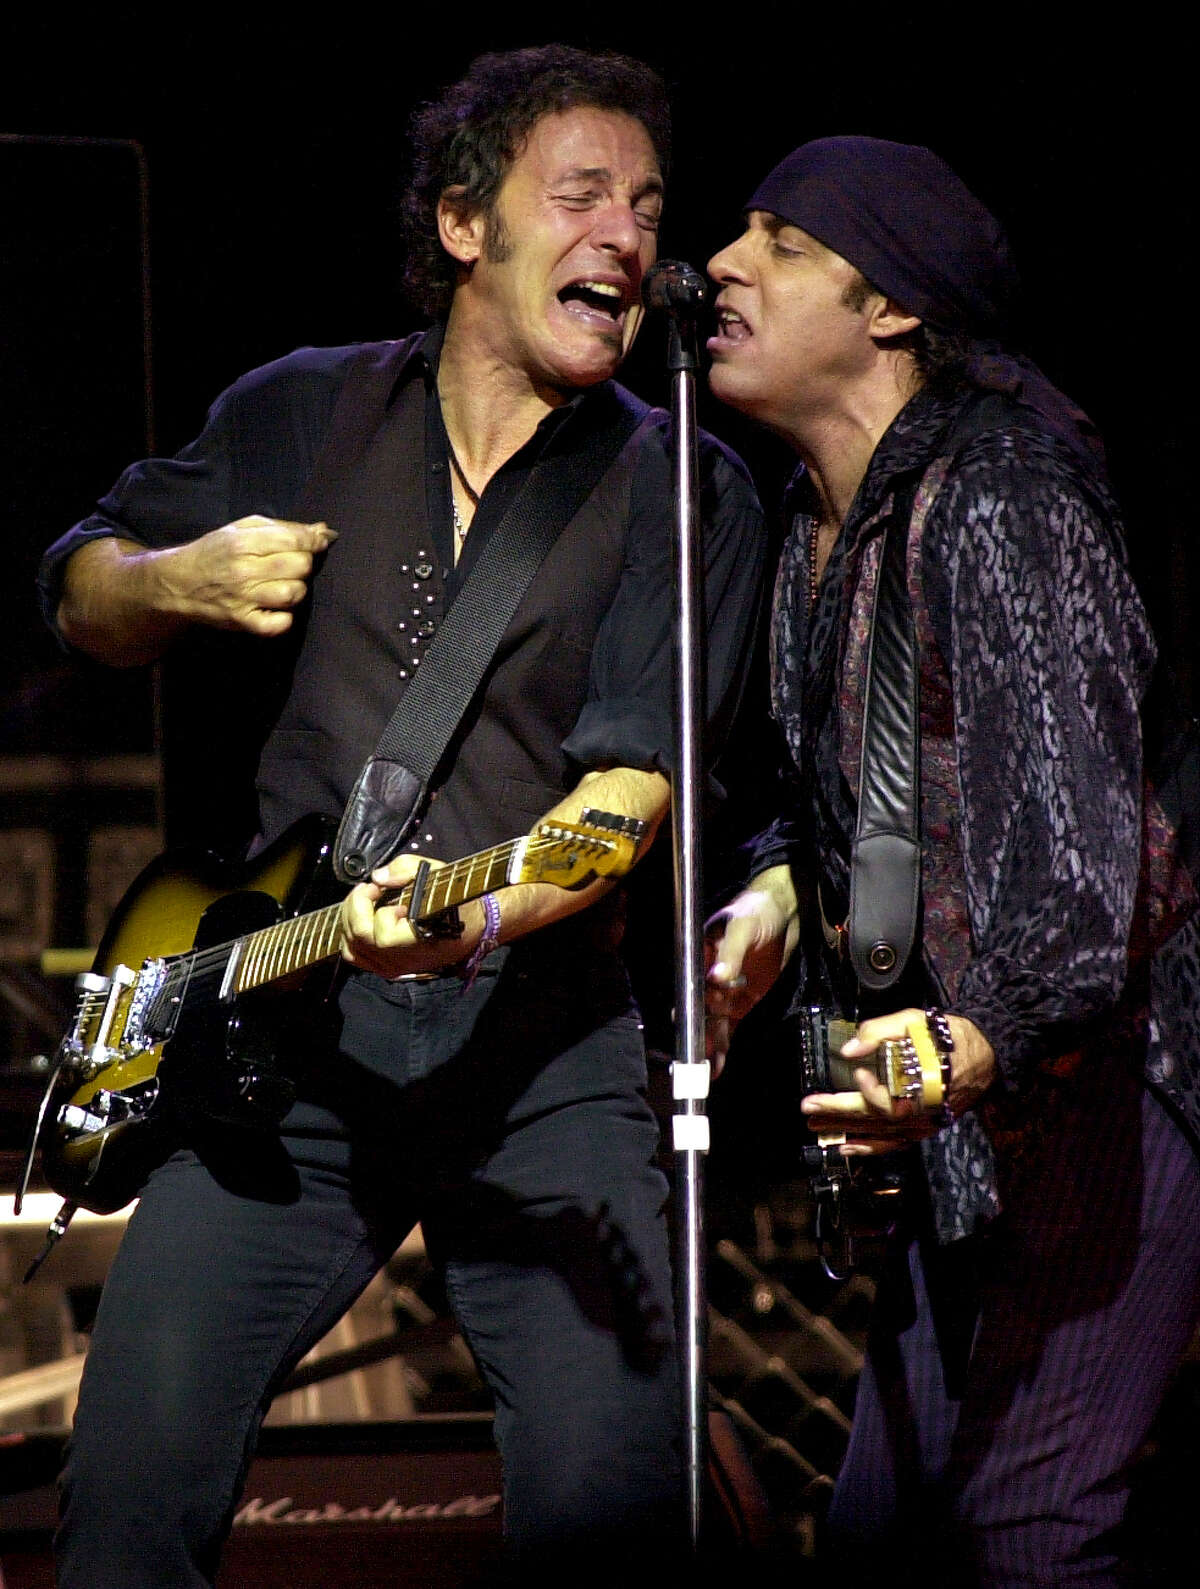 Times Union staff photo by Lori Kane Bruce Springsteen and Steven Van Zandt sing to a sold out crowd at the Pepsi Arena on Friday, December 13, 2002. Springsteen had his E Street band with him.